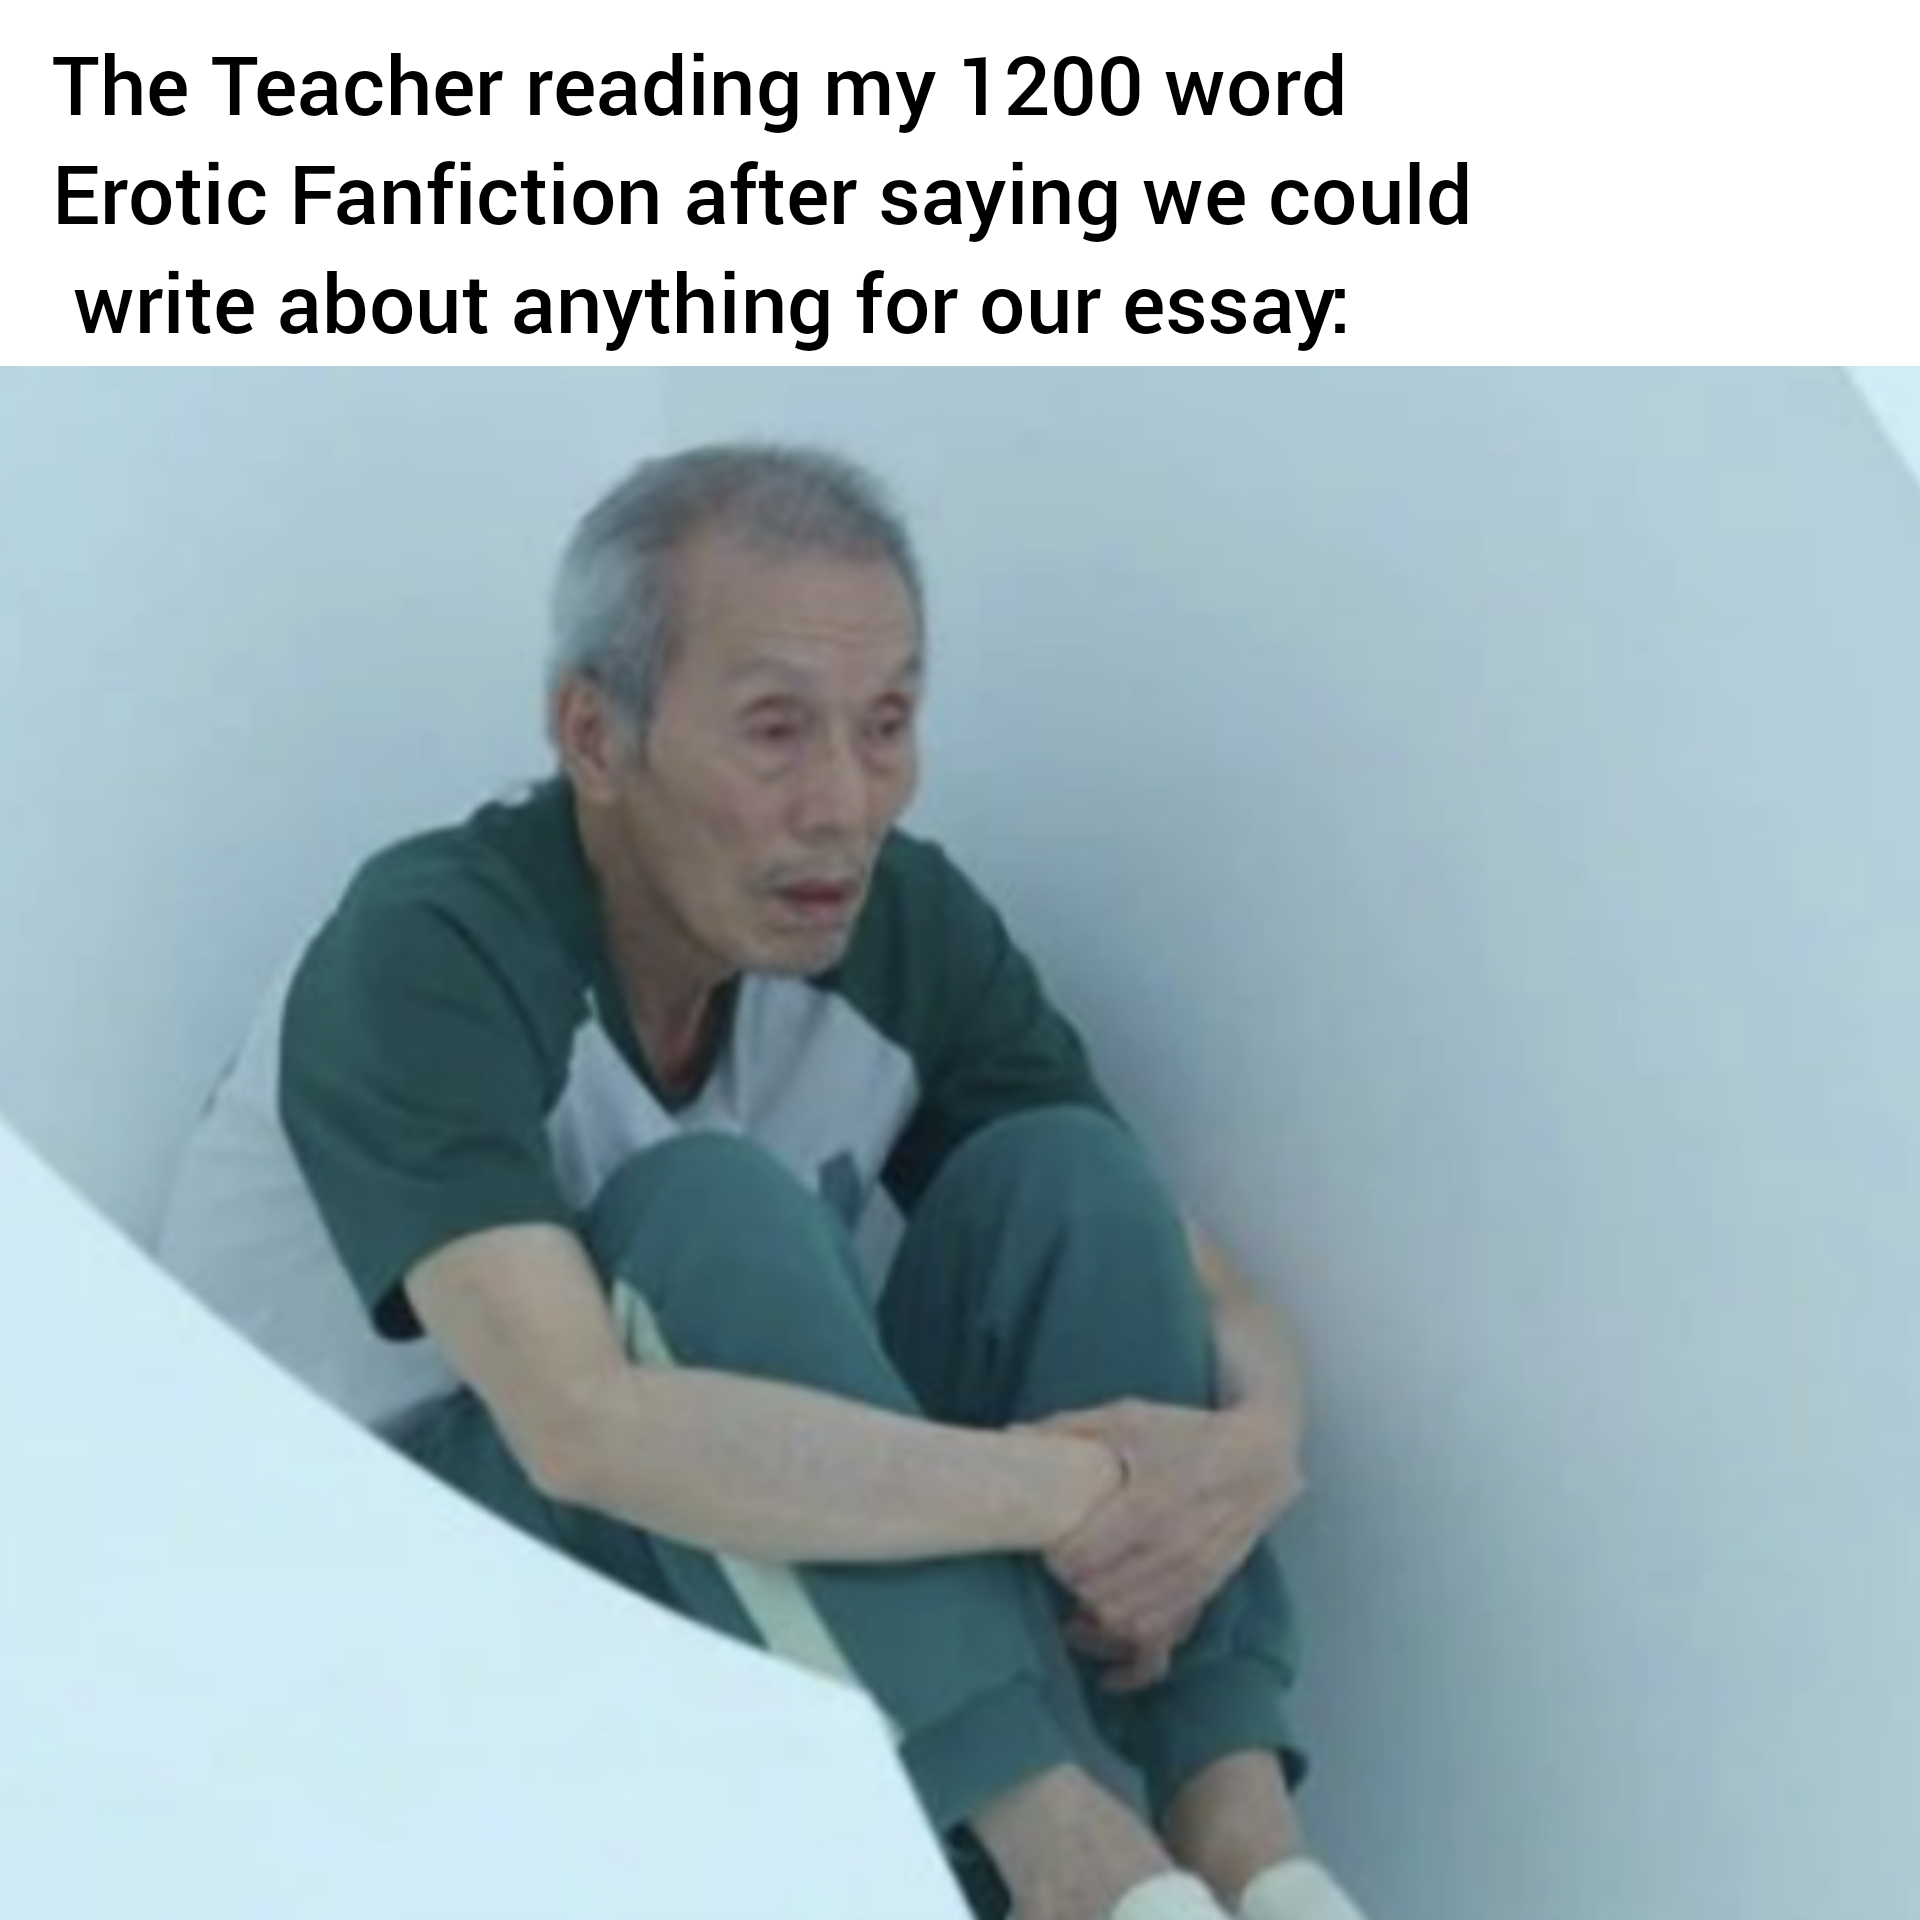 hilarious memes - squid game sitting meme - The Teacher reading my 1200 word Erotic Fanfiction after saying we could write about anything for our essay